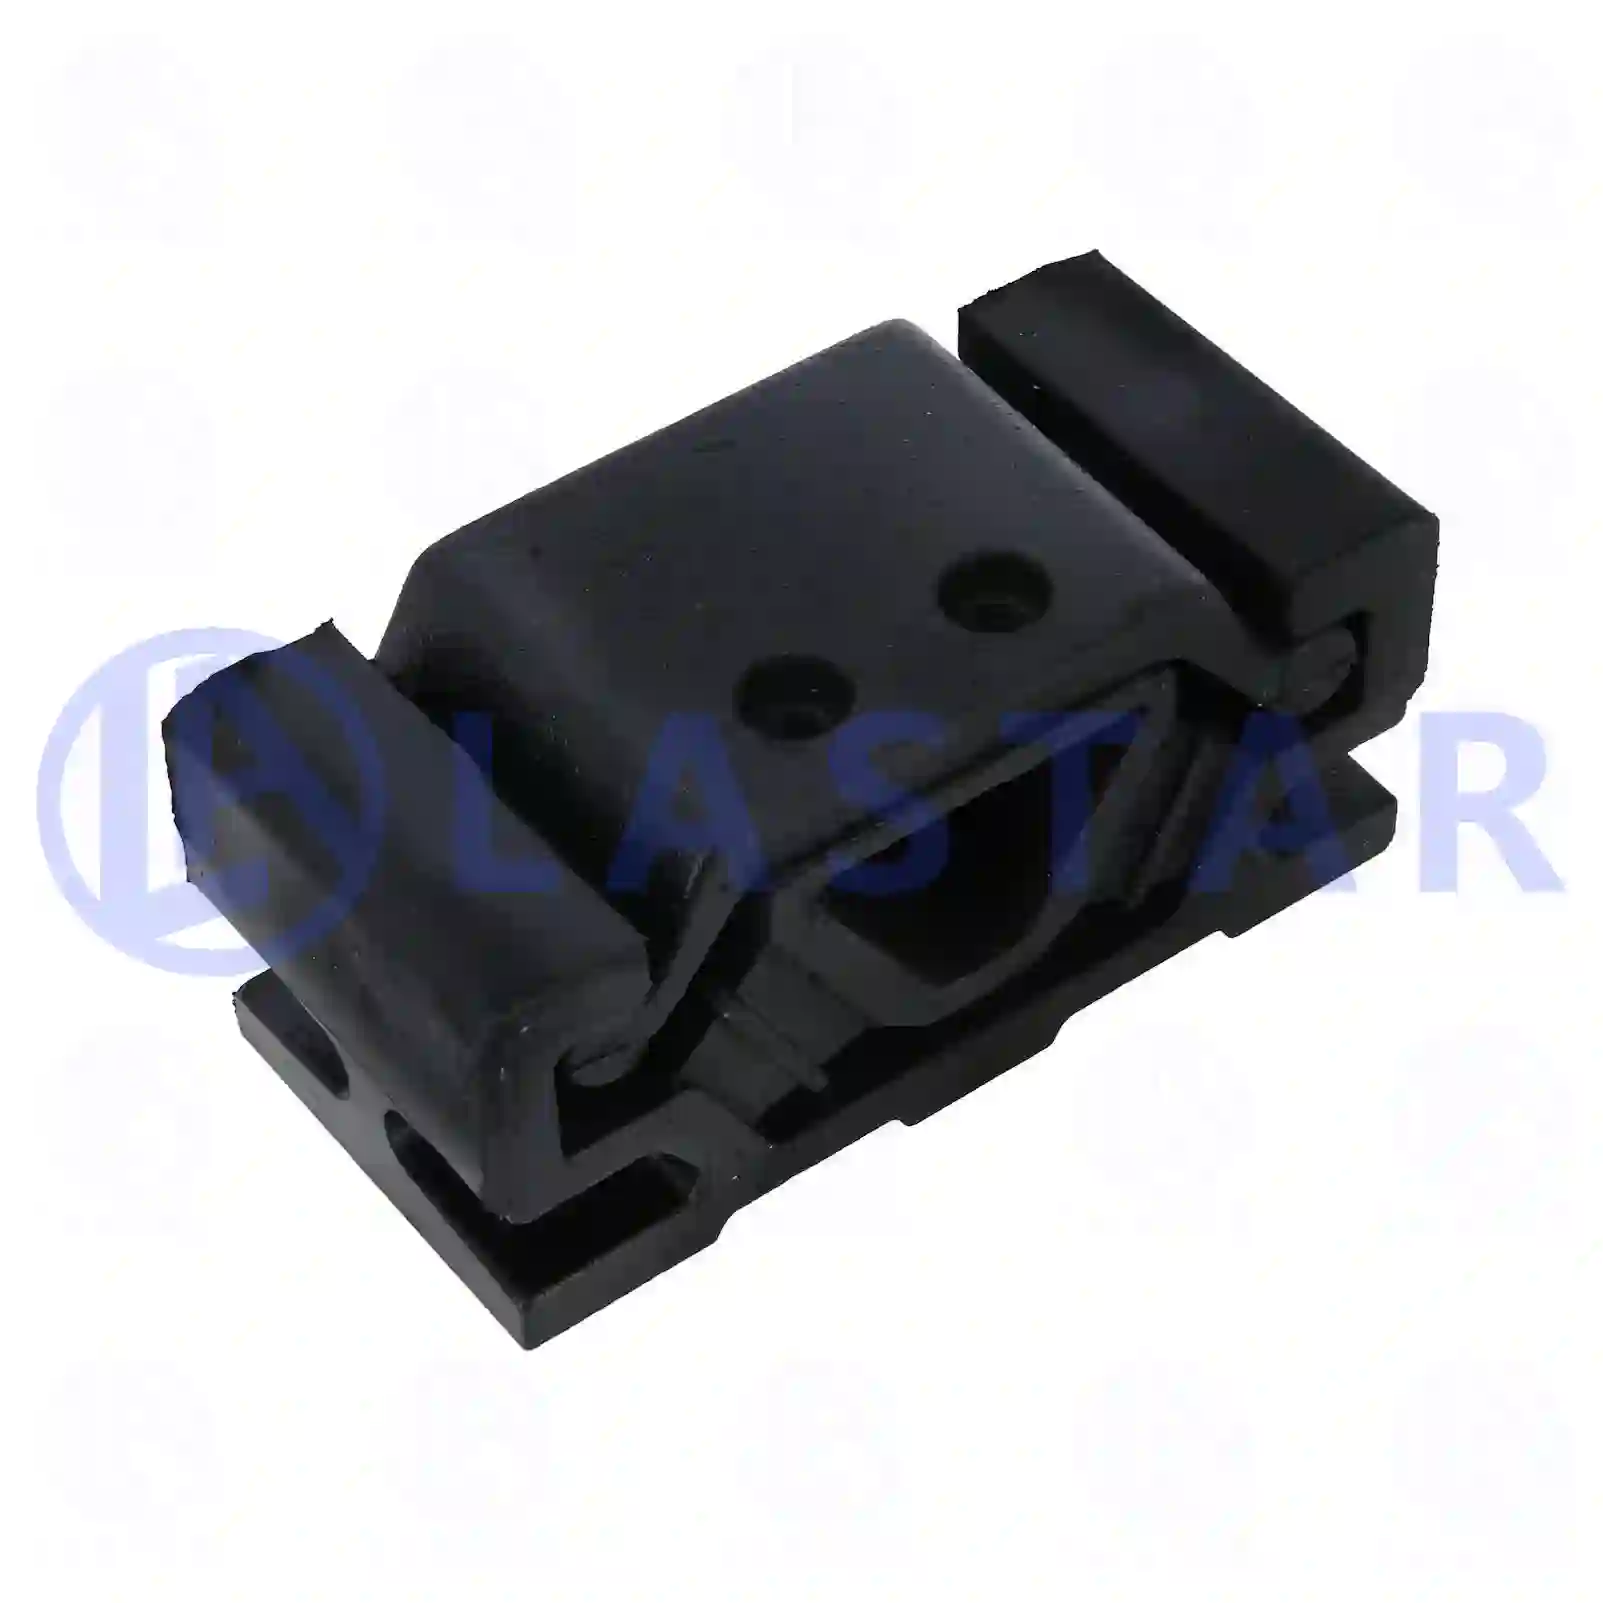 Engine mounting, 77700120, 3072400017, 3072400117, ||  77700120 Lastar Spare Part | Truck Spare Parts, Auotomotive Spare Parts Engine mounting, 77700120, 3072400017, 3072400117, ||  77700120 Lastar Spare Part | Truck Spare Parts, Auotomotive Spare Parts